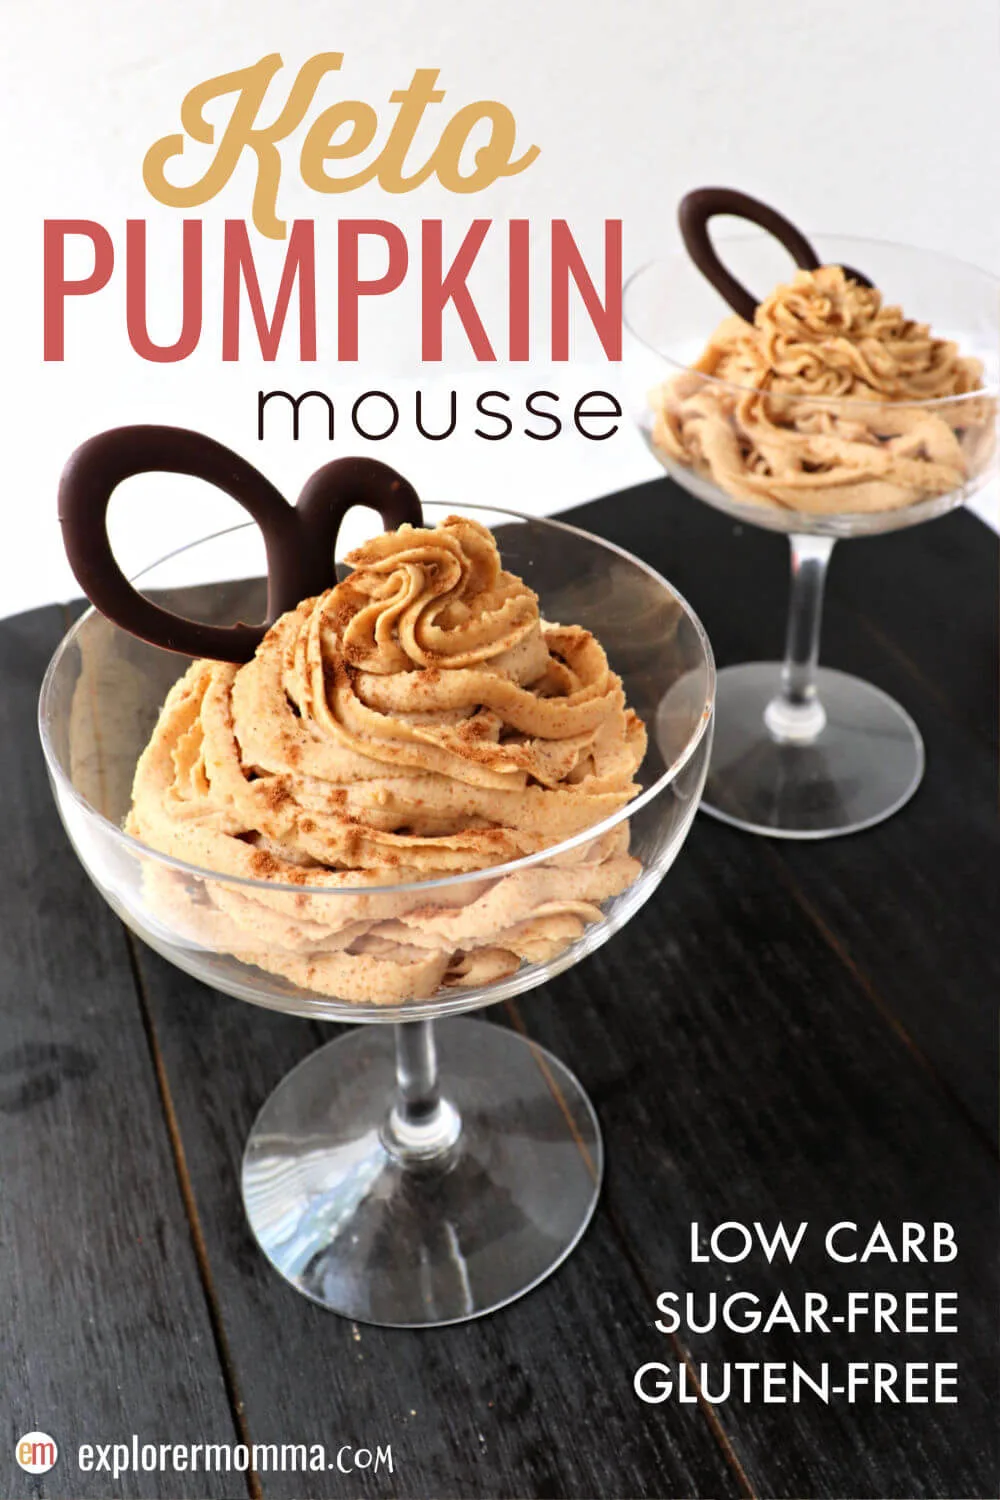 Easy whipped keto pumpkin mousse blends delicious creamy mascarpone cheese with pumpkin spice fall flavors. The perfect low carb dessert for a keto diet. #ketopumpkinspice #ketodessertrecipes #lowcarbdesserts